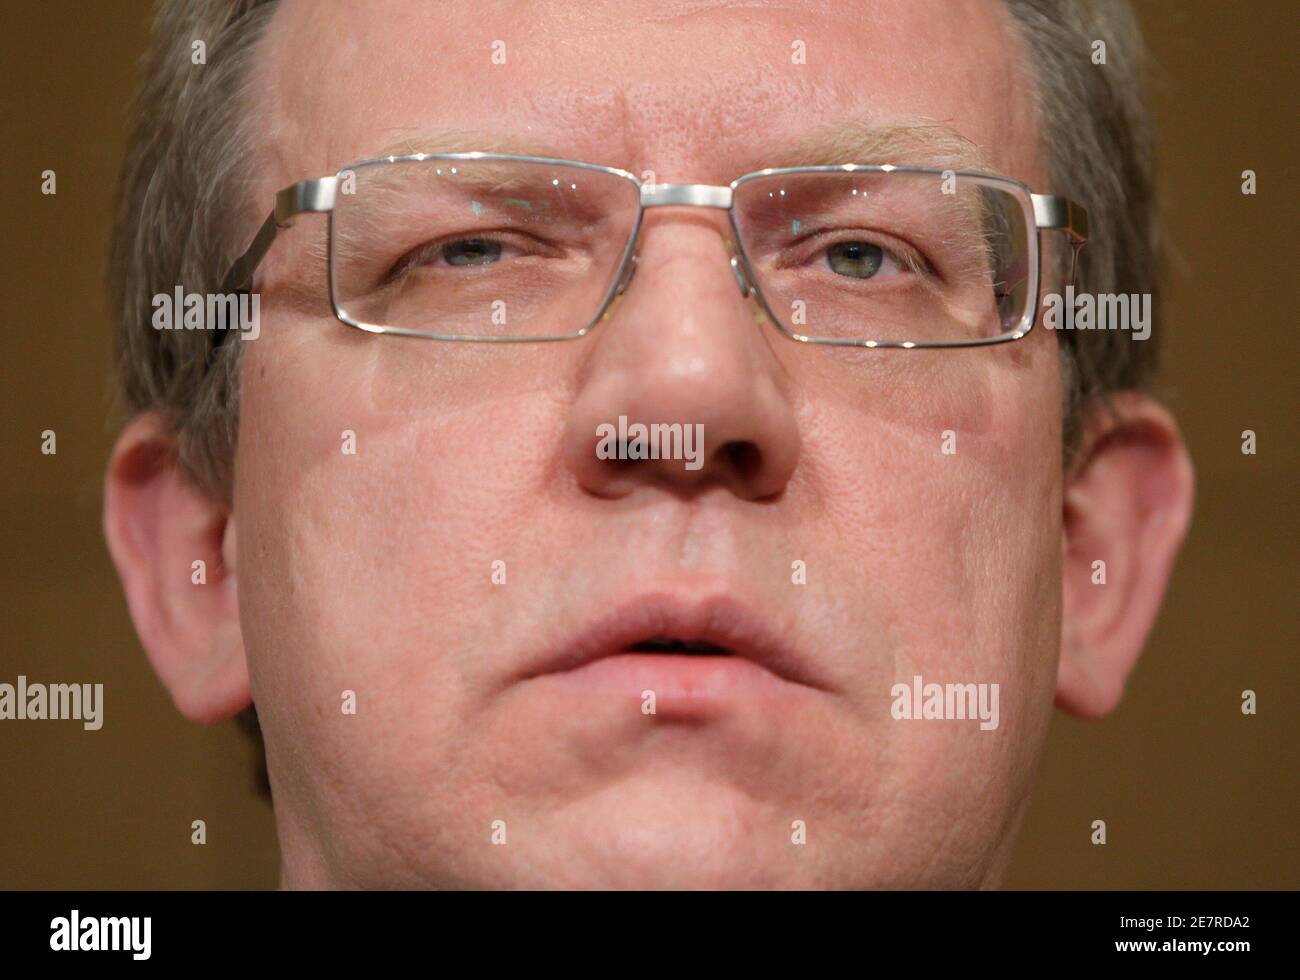 Russia's Finance Minister Alexei Kudrin speaks on 'Russian Economic Policy in the Midst of the Global Financial Crisis' before a Peterson Institute luncheon in Washington April 24, 2009. REUTERS/Yuri Gripas (UNITED STATES POLITICS BUSINESS HEADSHOT) Stock Photo